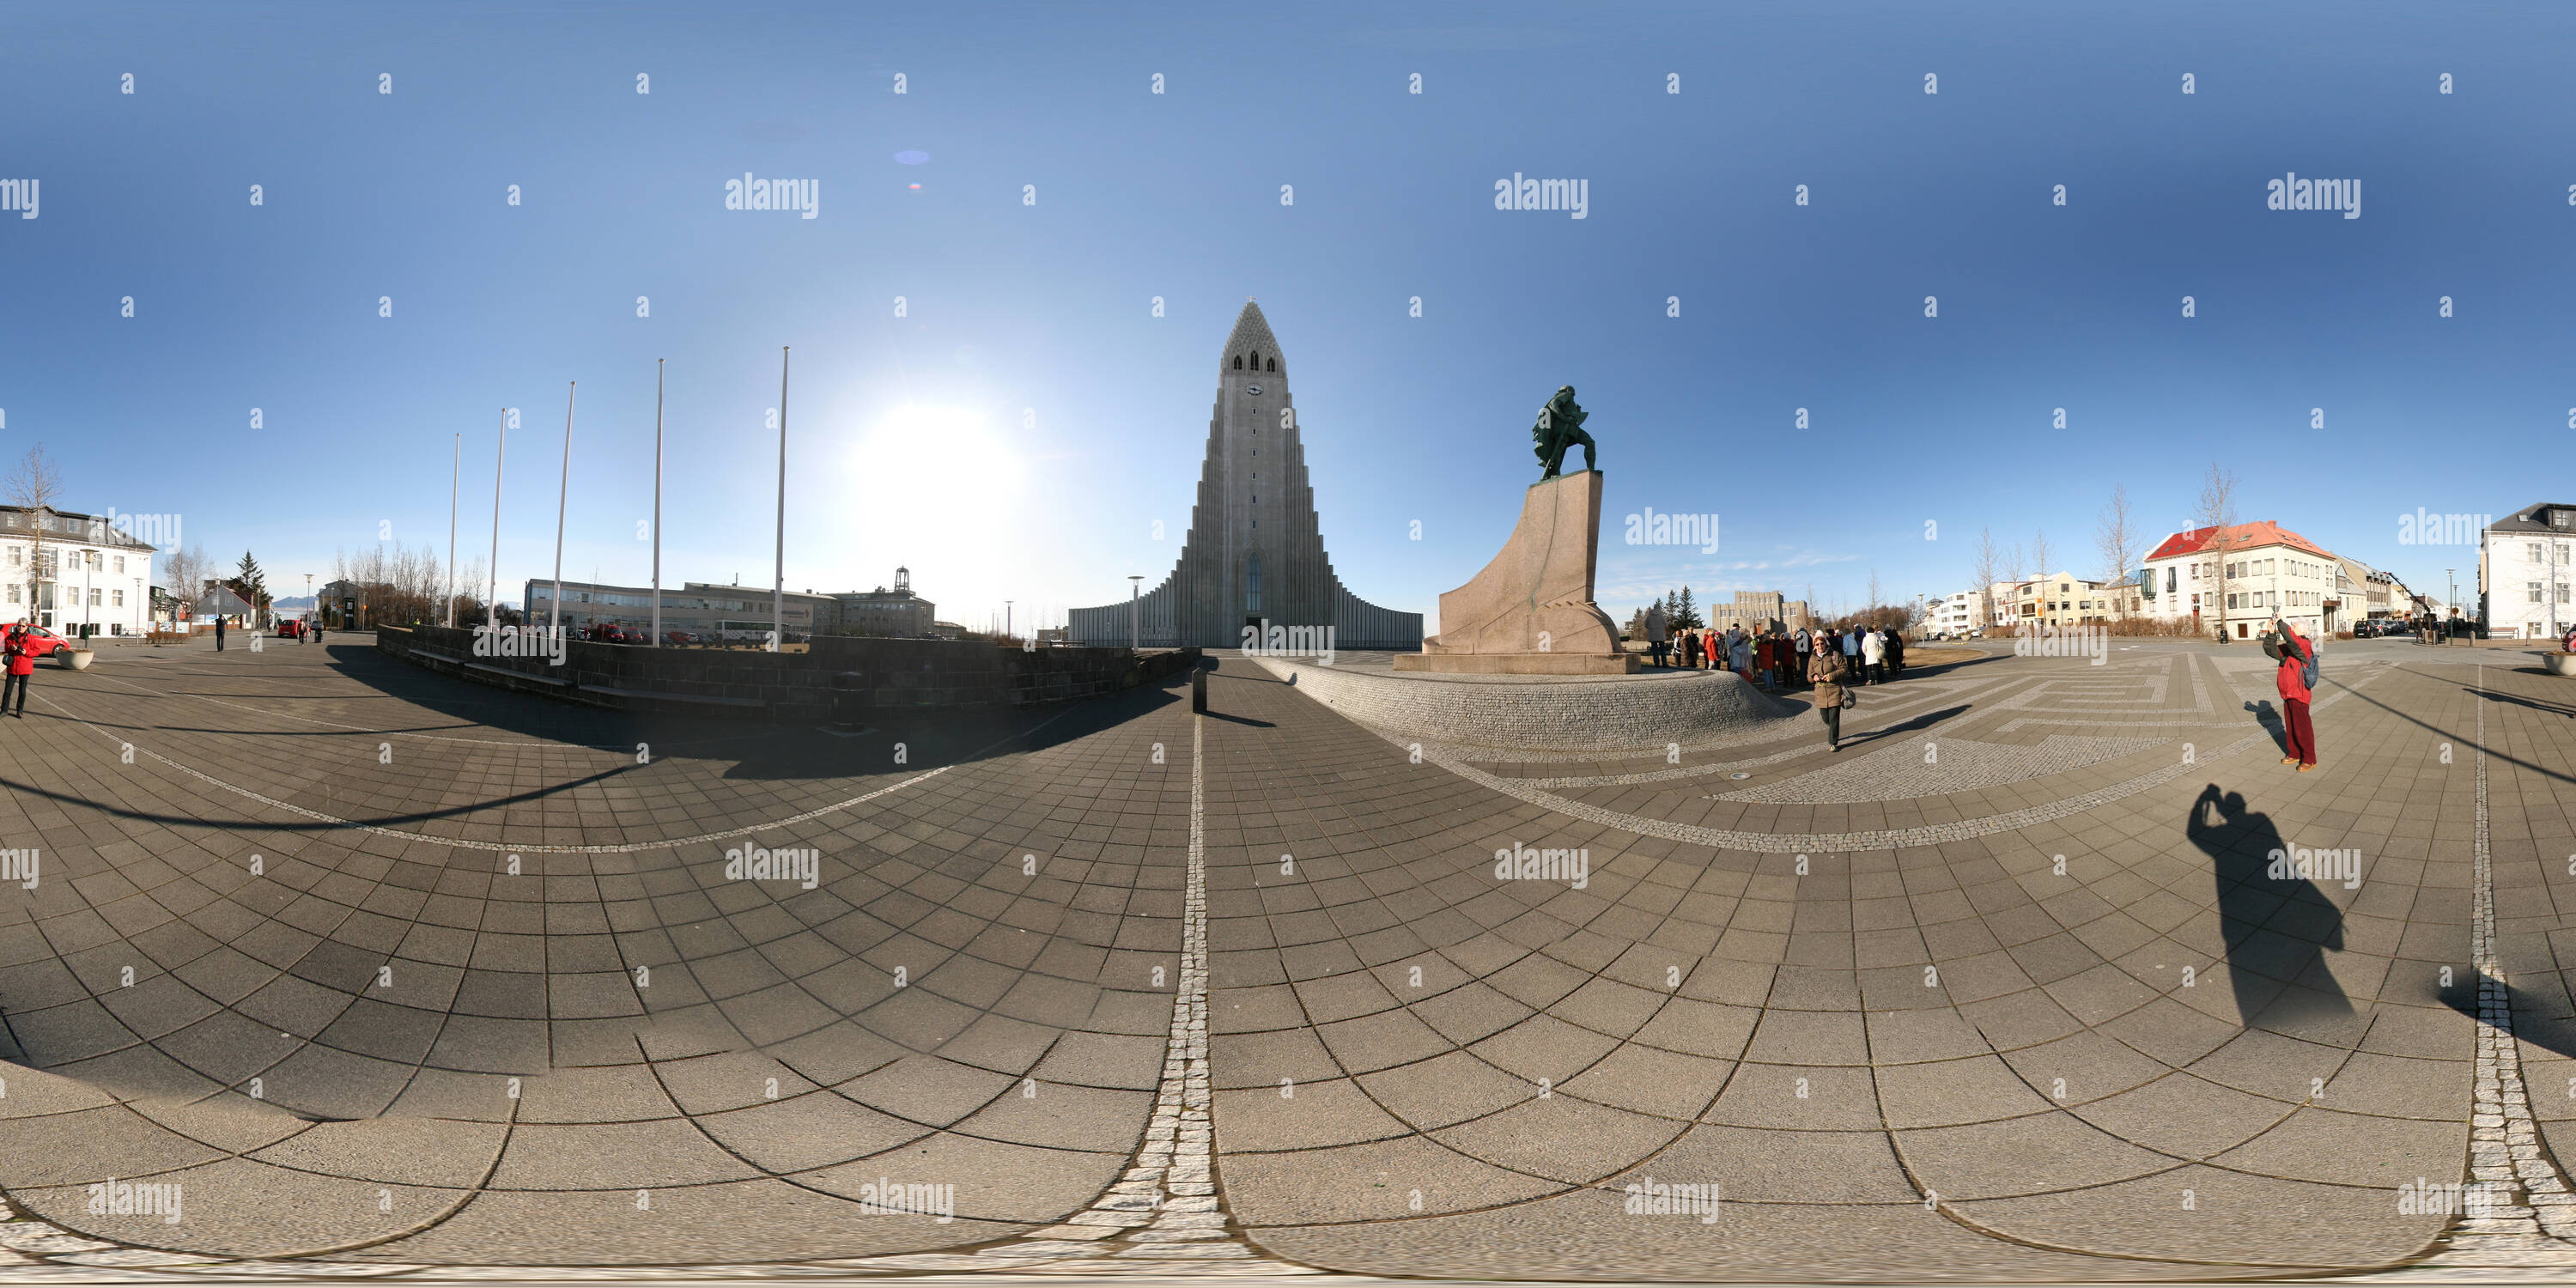 360 degree panoramic view of Leif Ericsson monument and the Hallgrimmskirkja as background